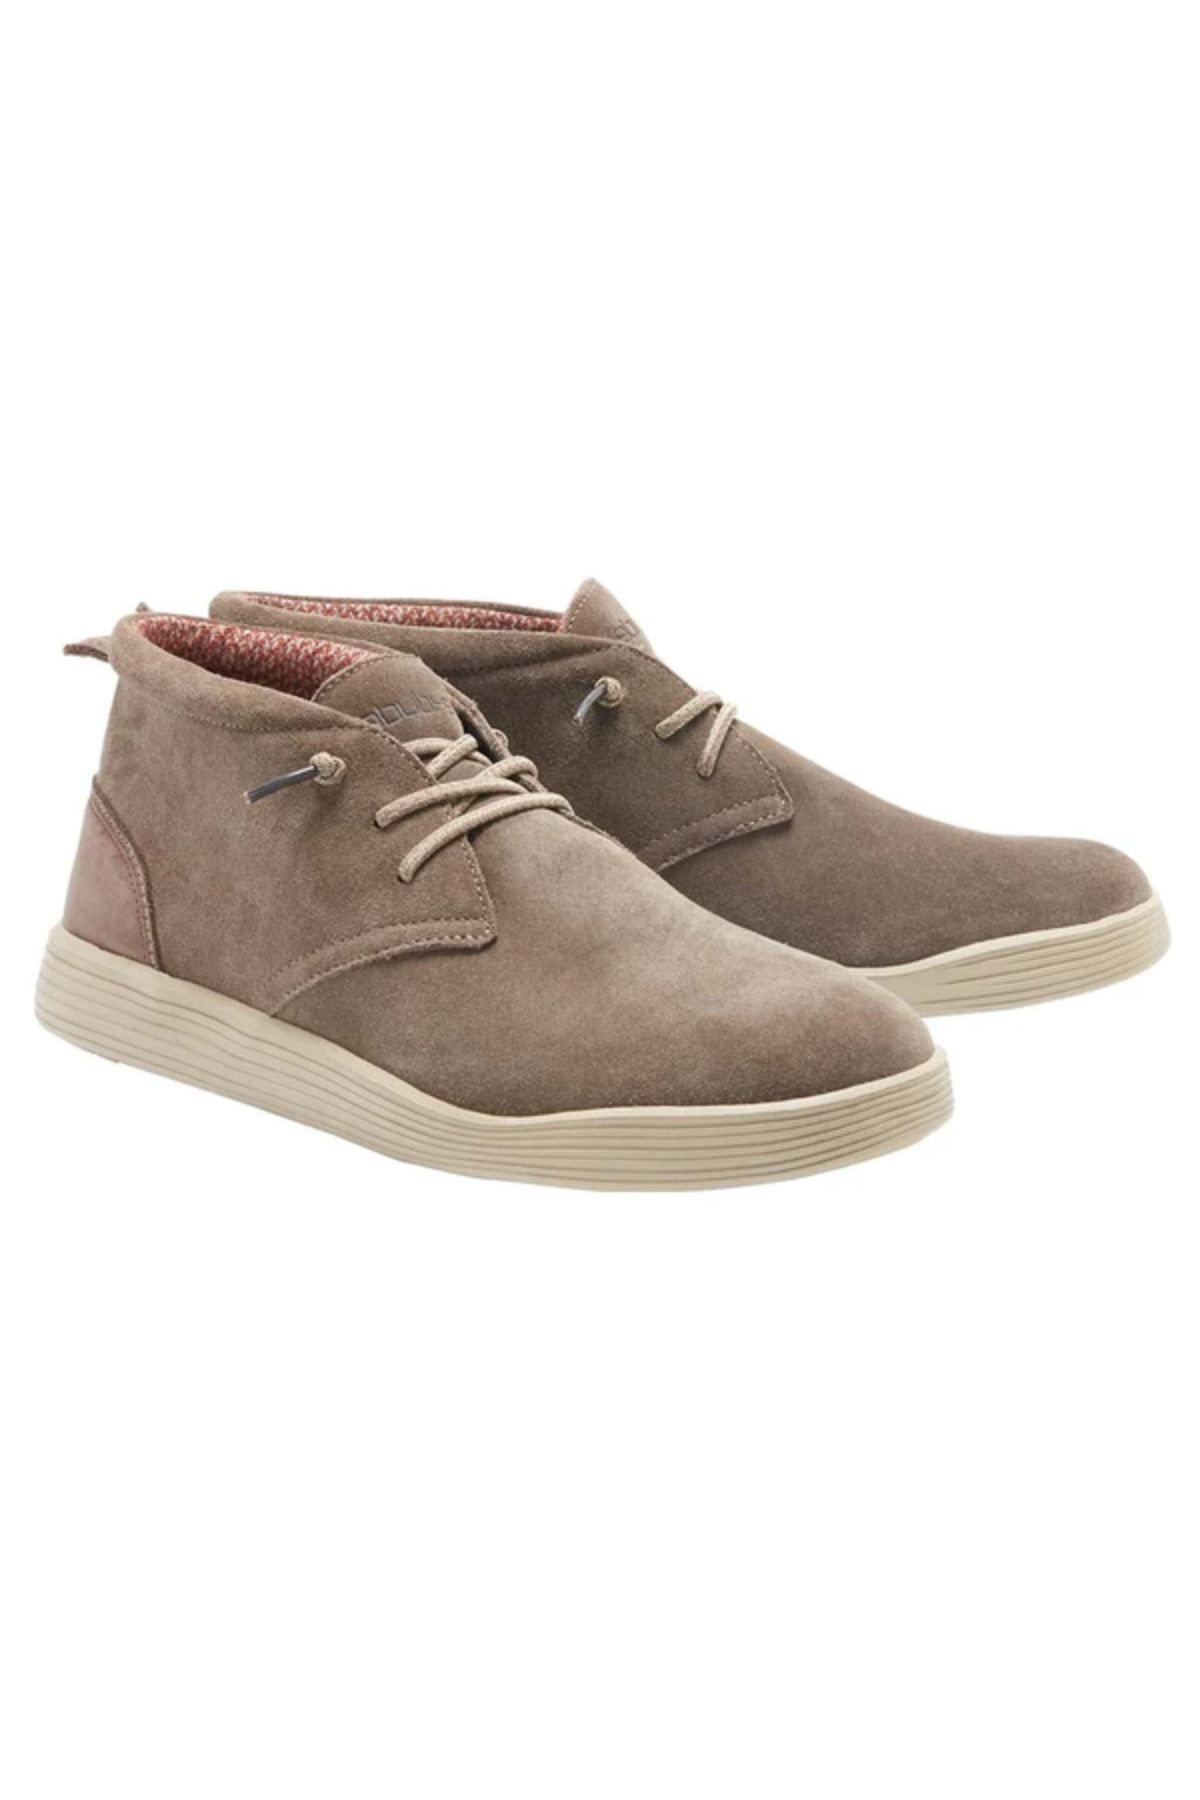 HEYDUDE Jo Suede Fossil Men Casual Shoes